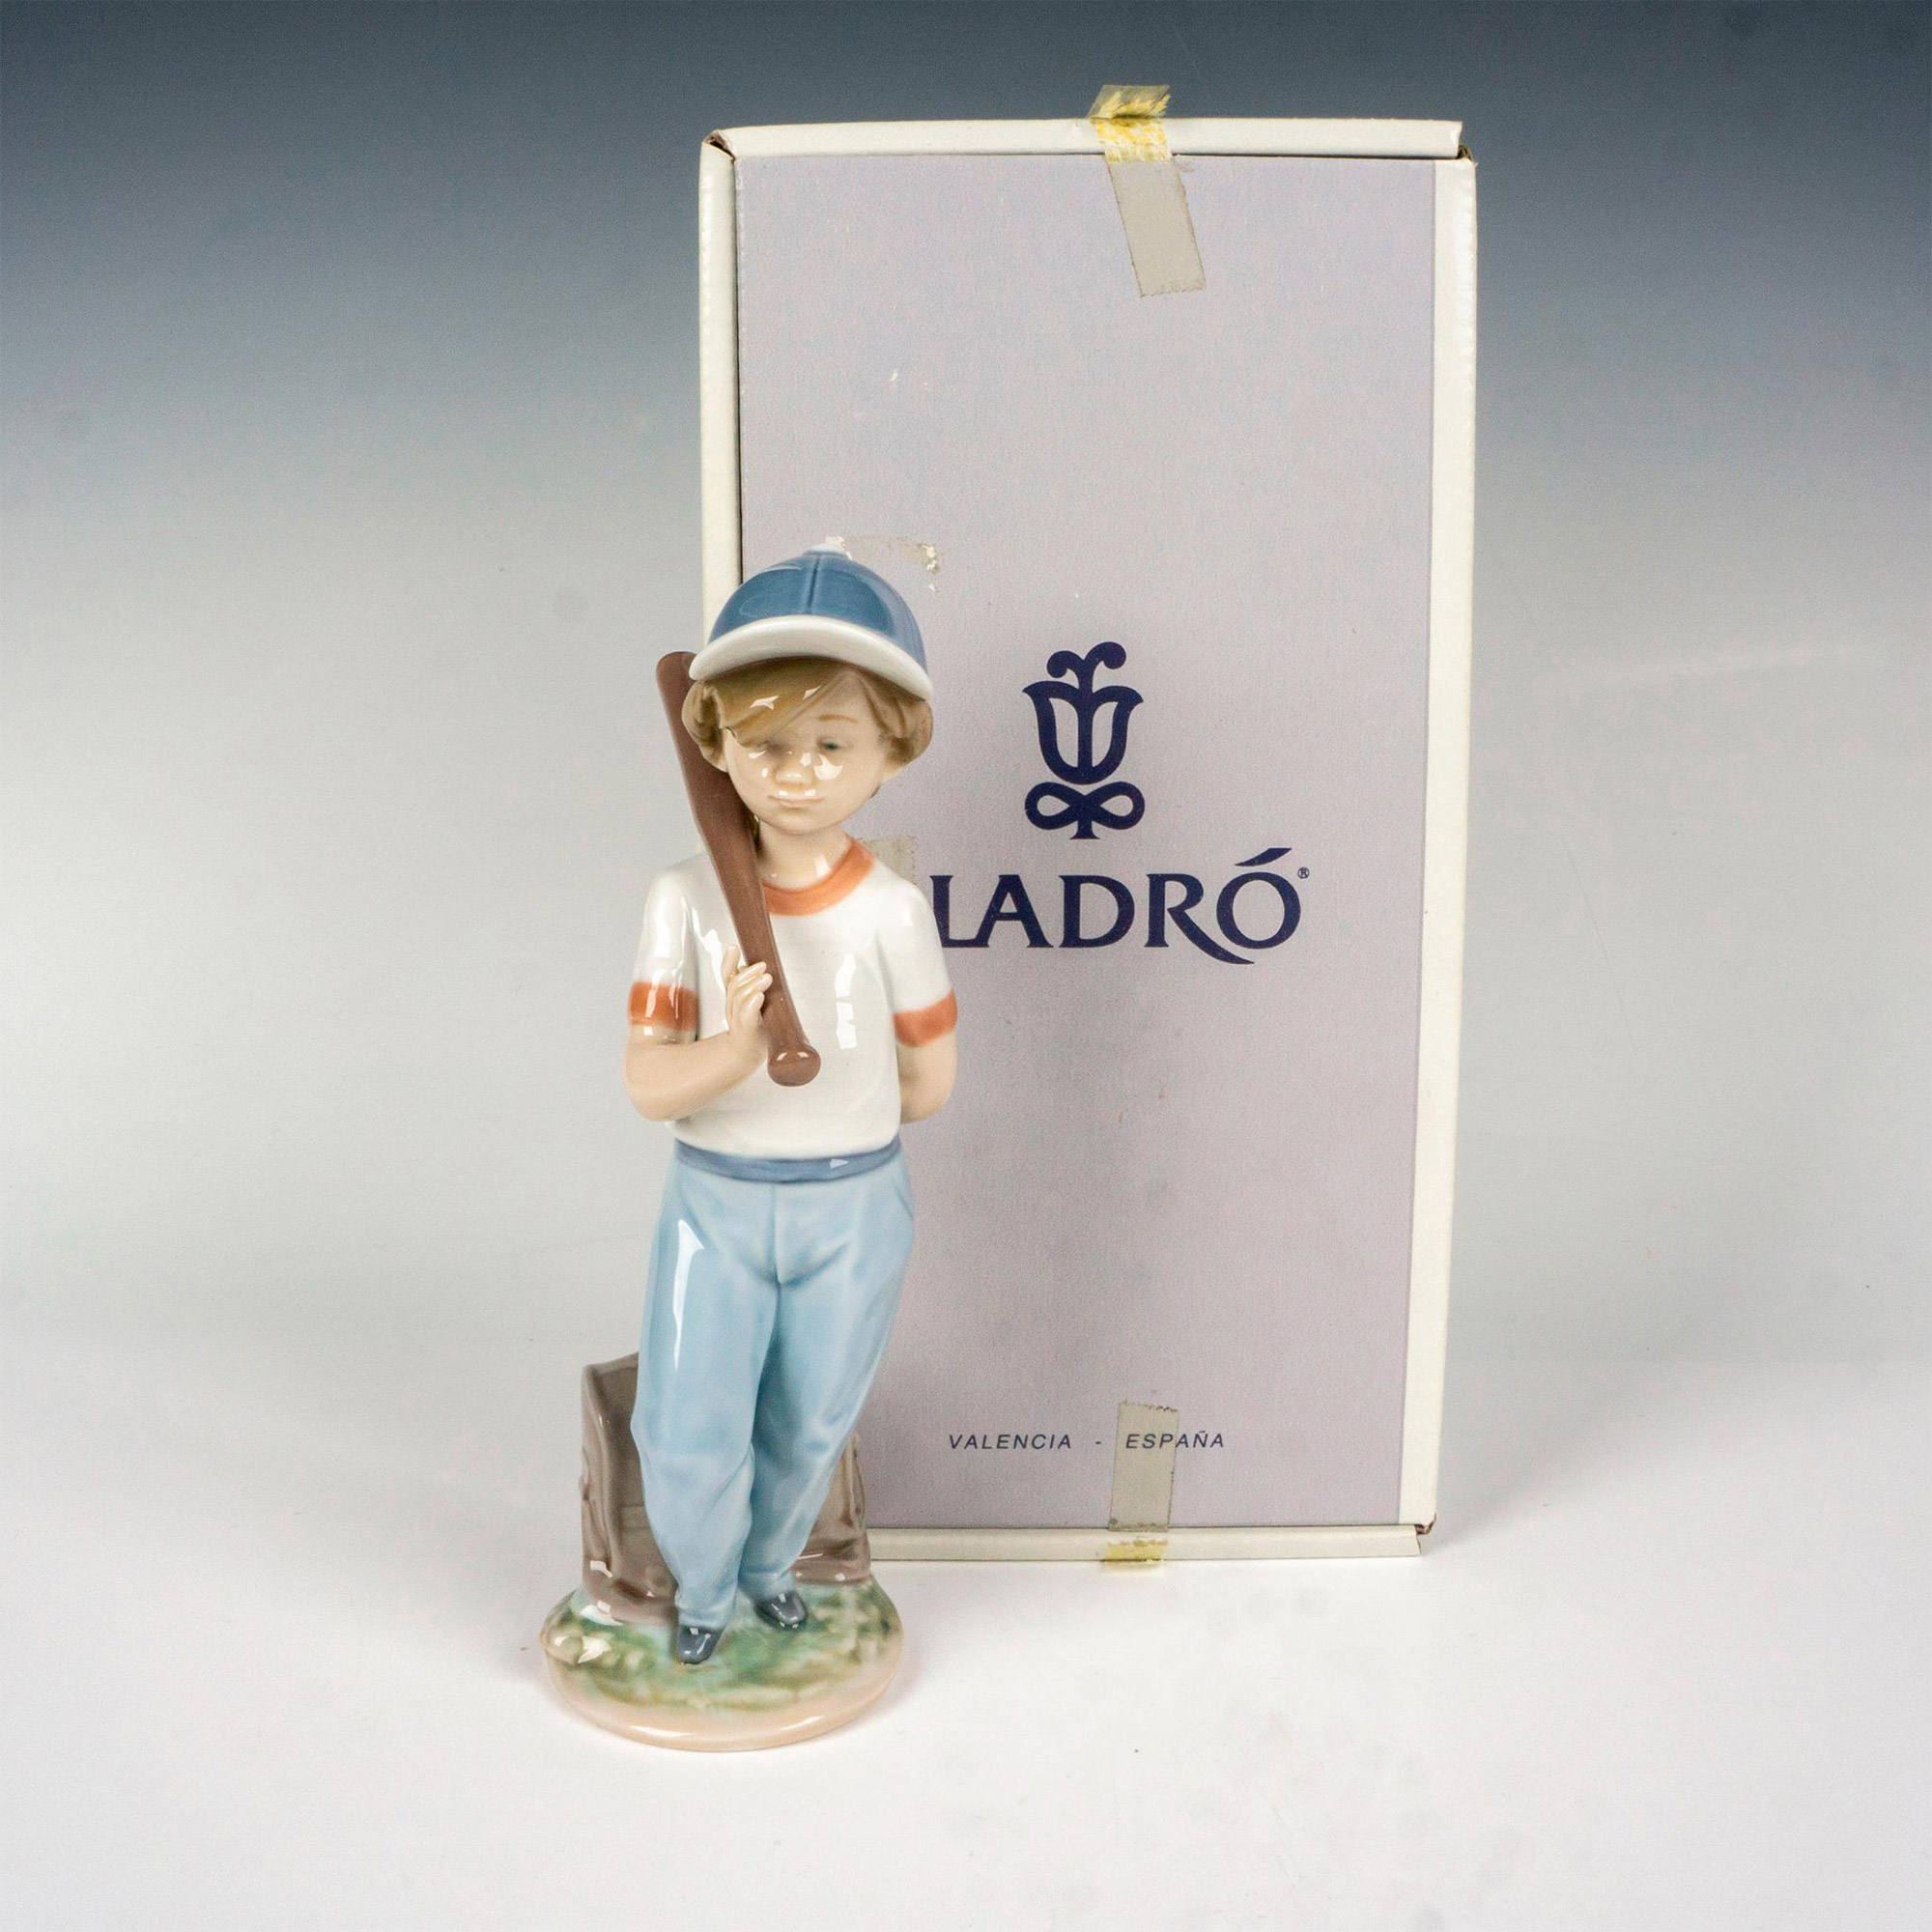 Can I Play? 1007610 - Lladro Porcelain Figurine - Image 4 of 4